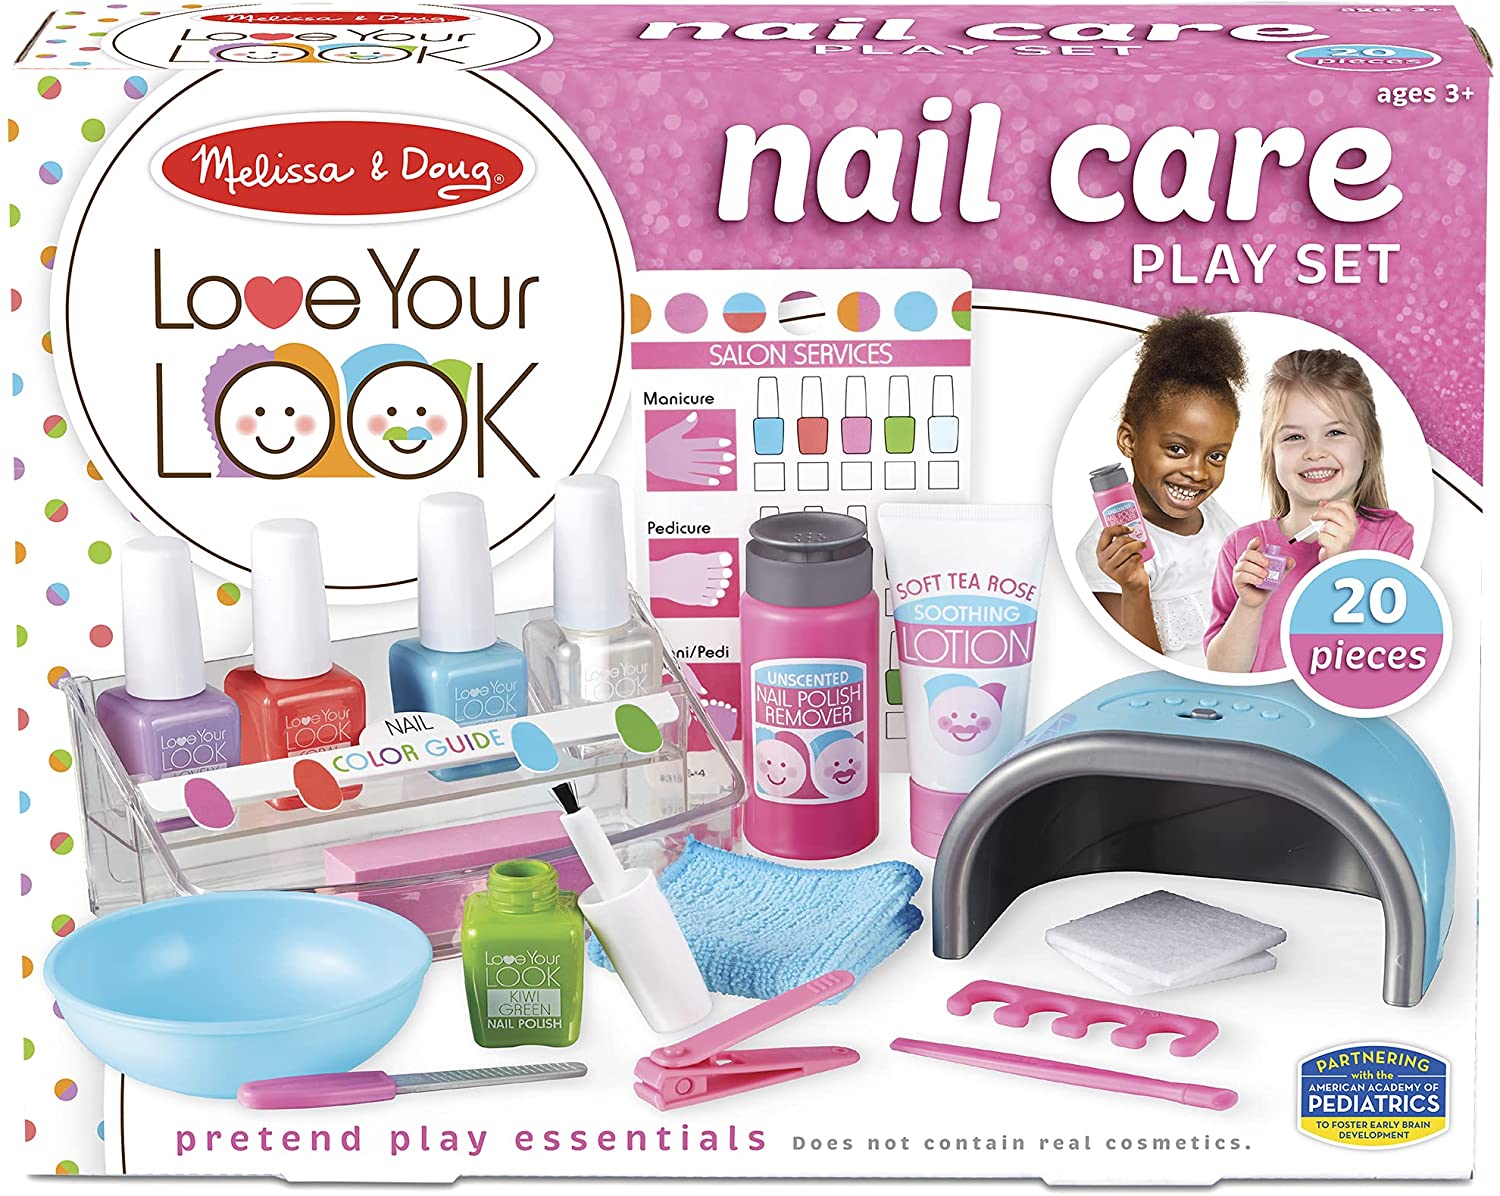 Love Your Look Nail Care Play Set